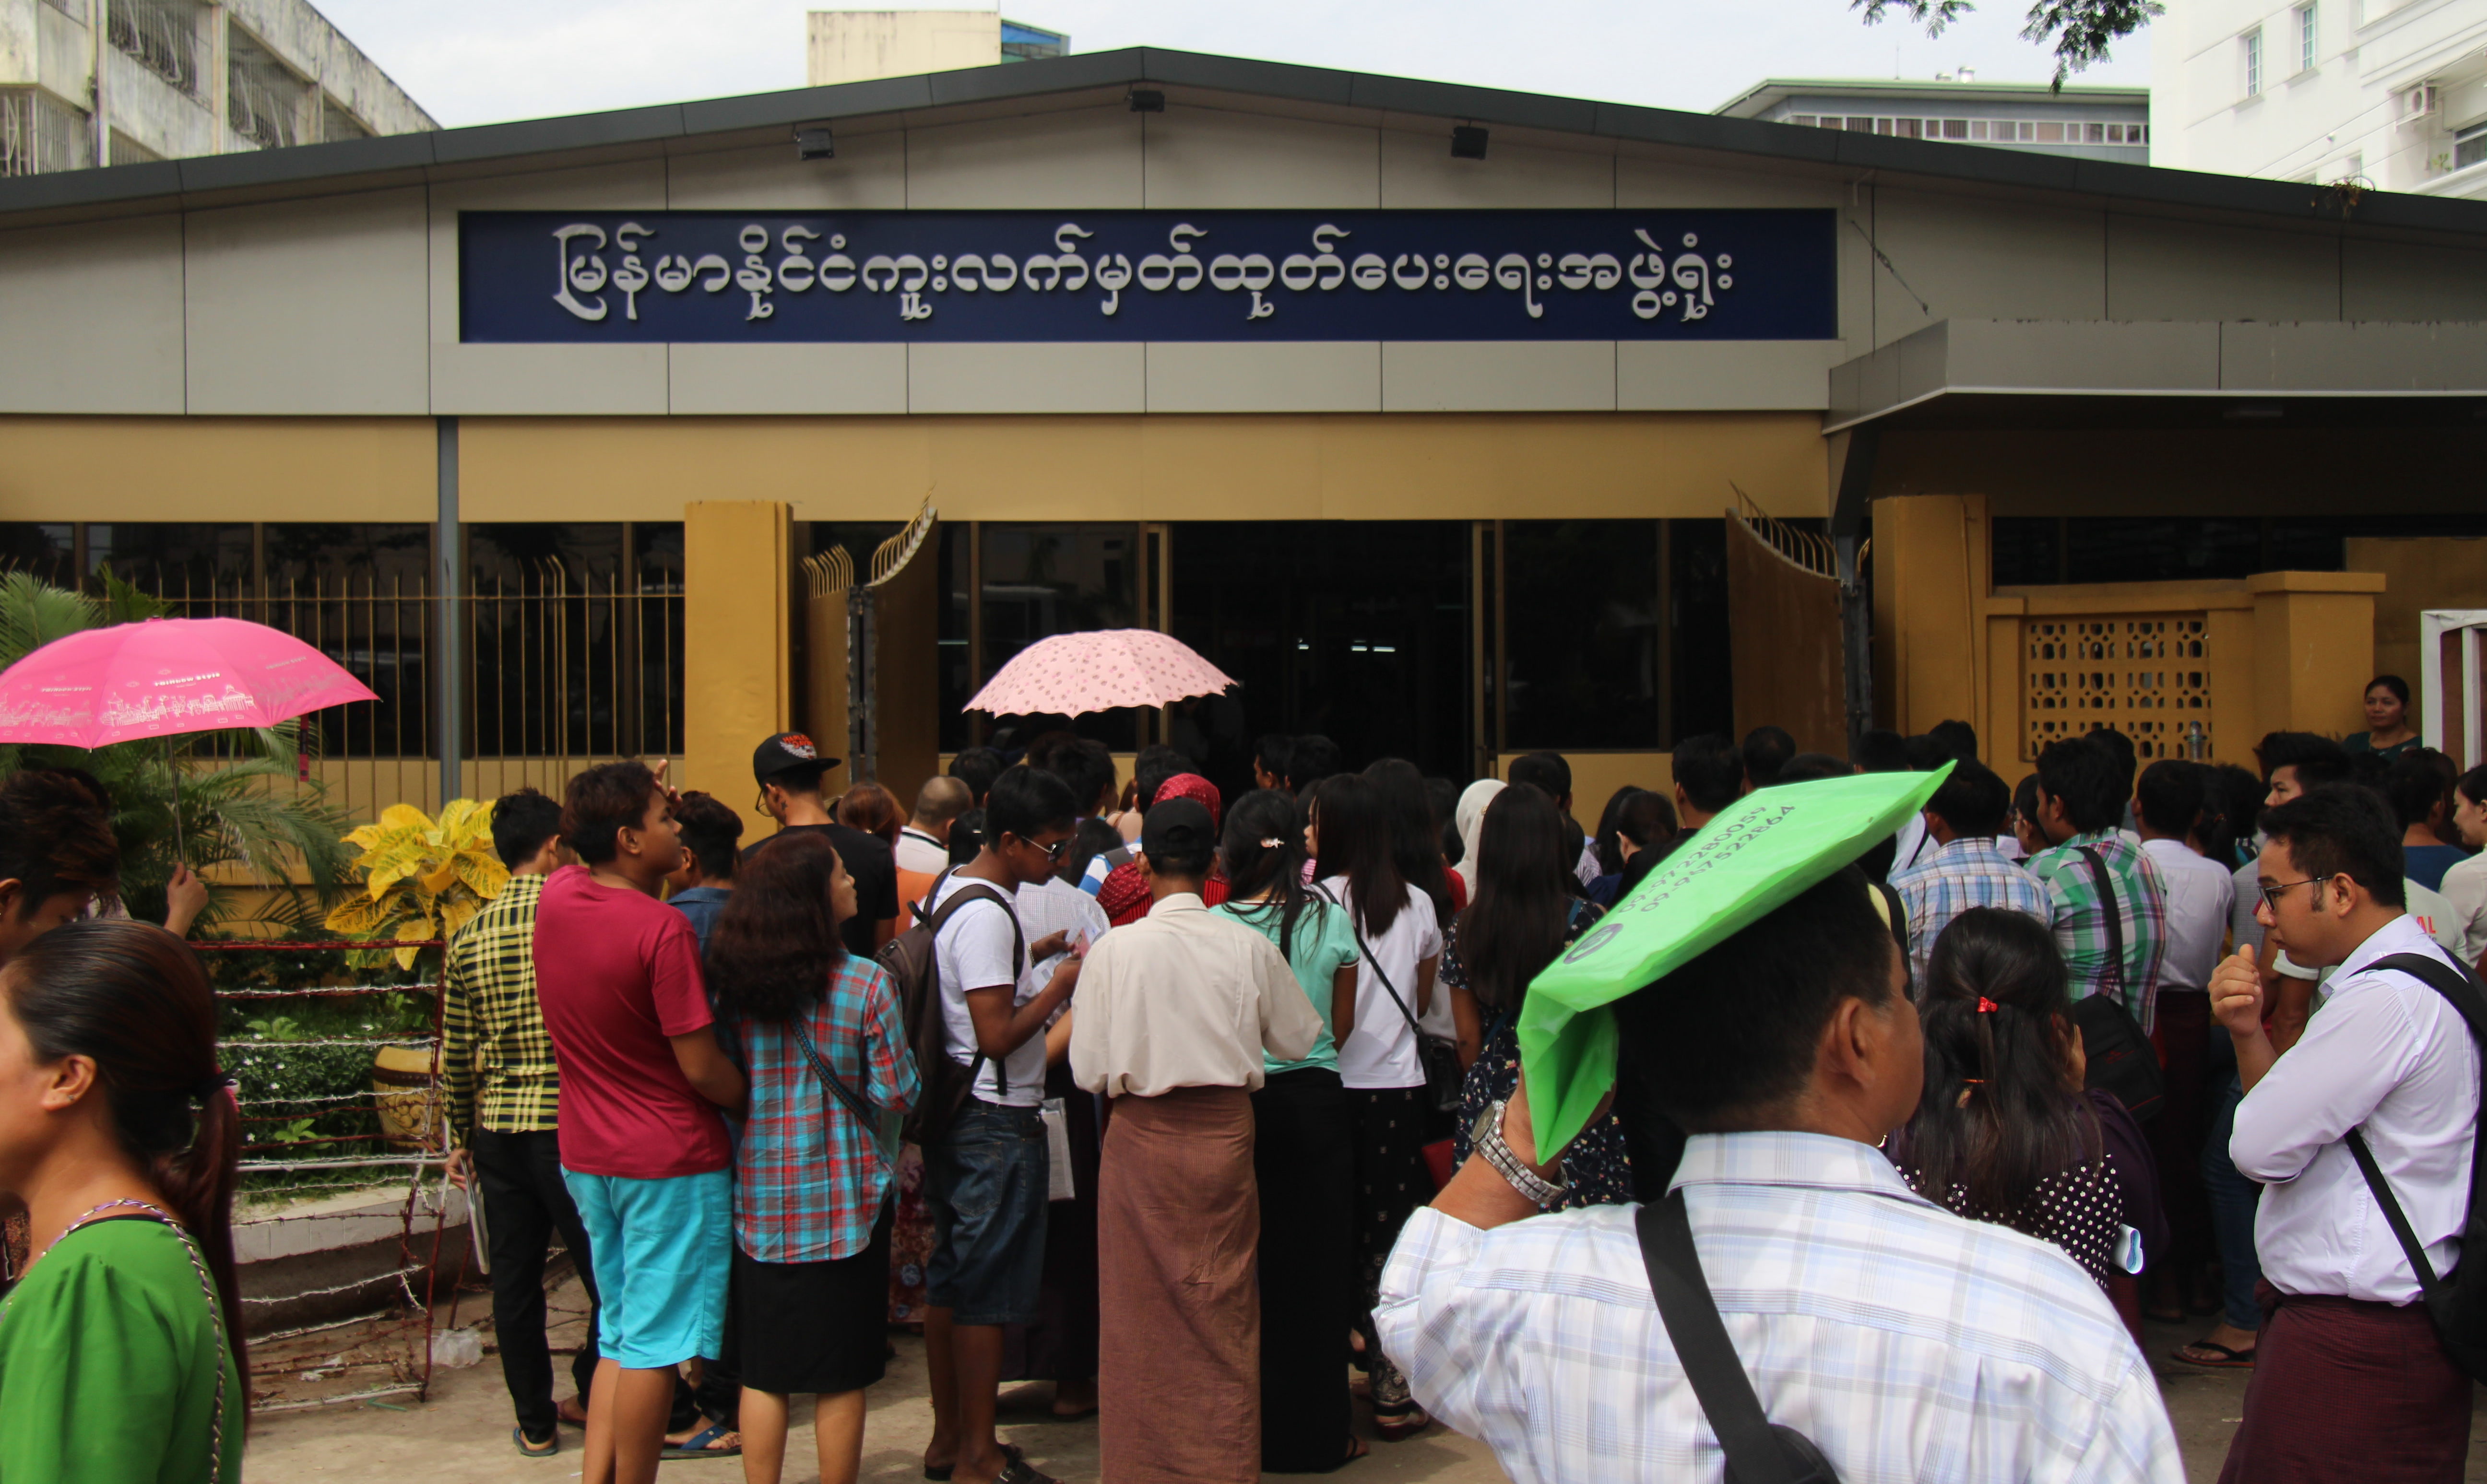 Applicants wait to enter Yangon’s Passport Issuing Office on May 21, 2018. Photo: Jacob Goldberg